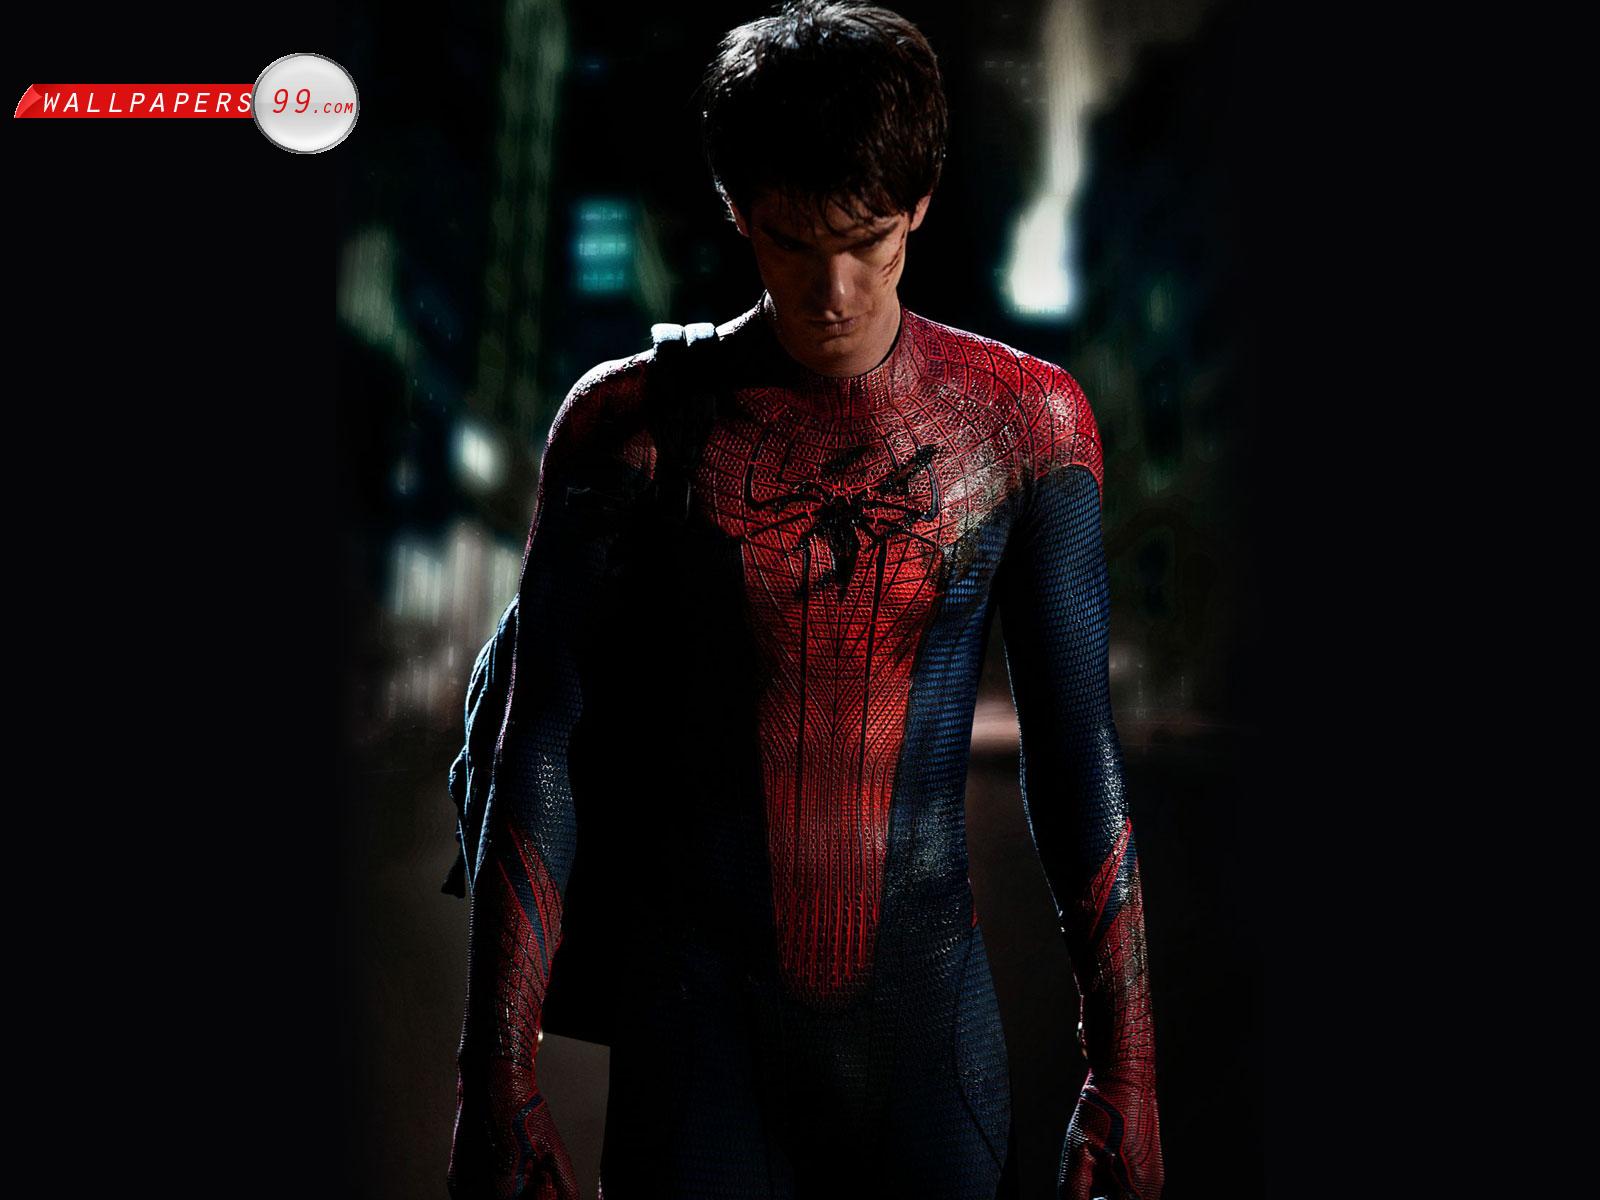 Spider Man 4 Wallpaper Picture Image 1600x1200 33726